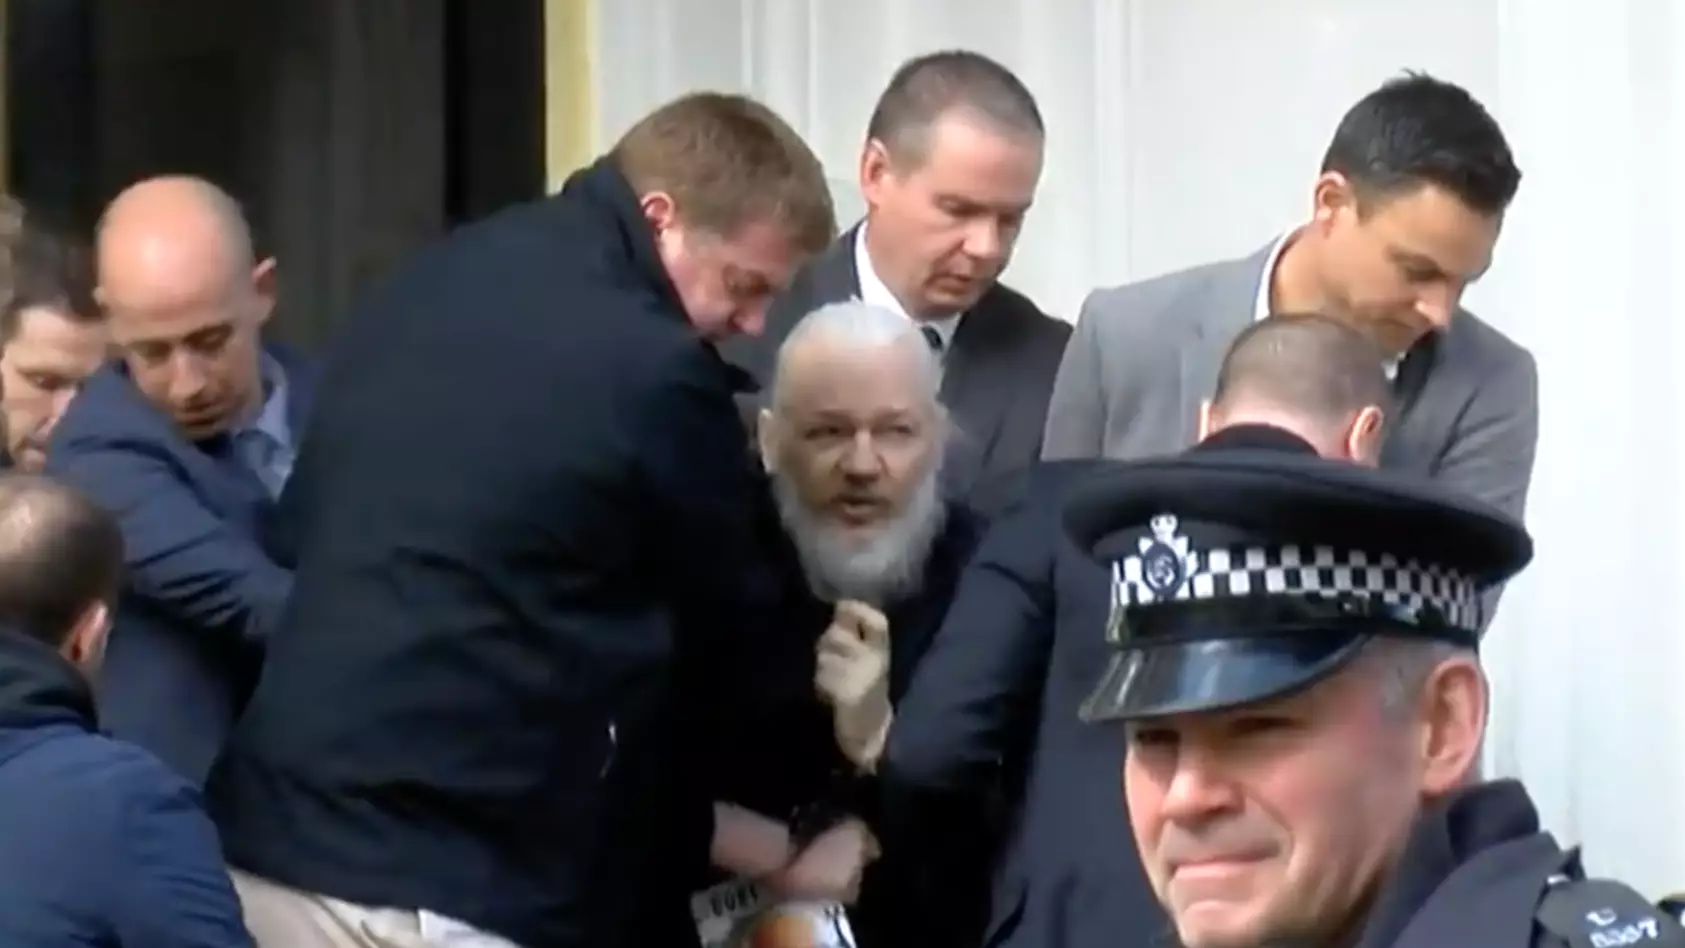 Aussies All Made The Same Joke After Julian Assange Was Booted From Ecuadorian Embassy